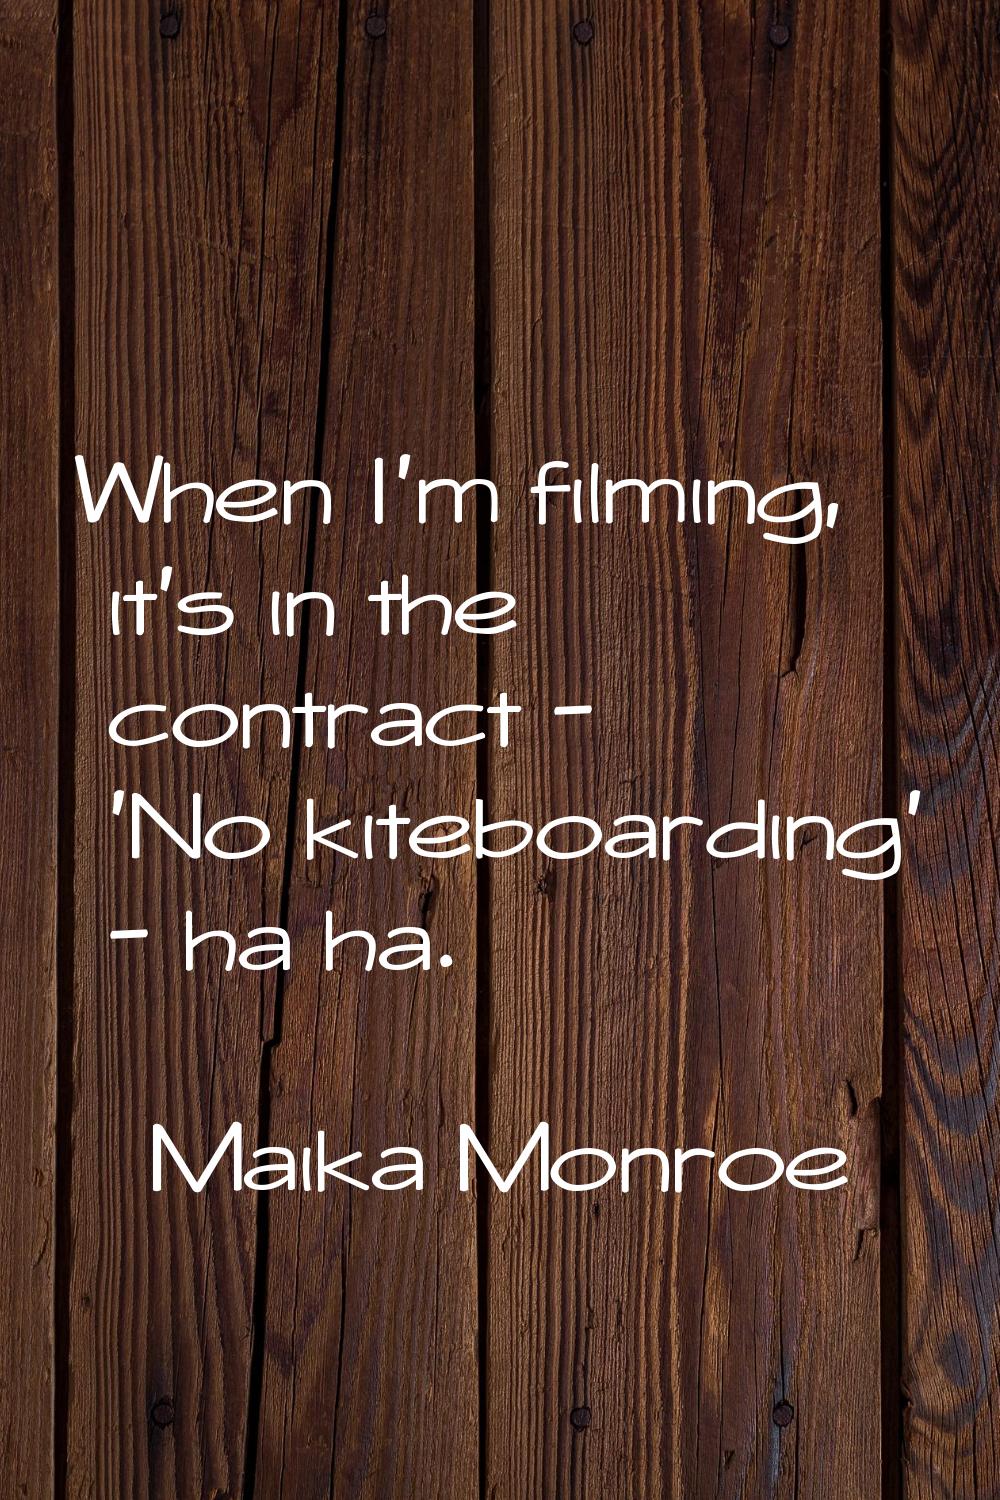 When I'm filming, it's in the contract - 'No kiteboarding' - ha ha.